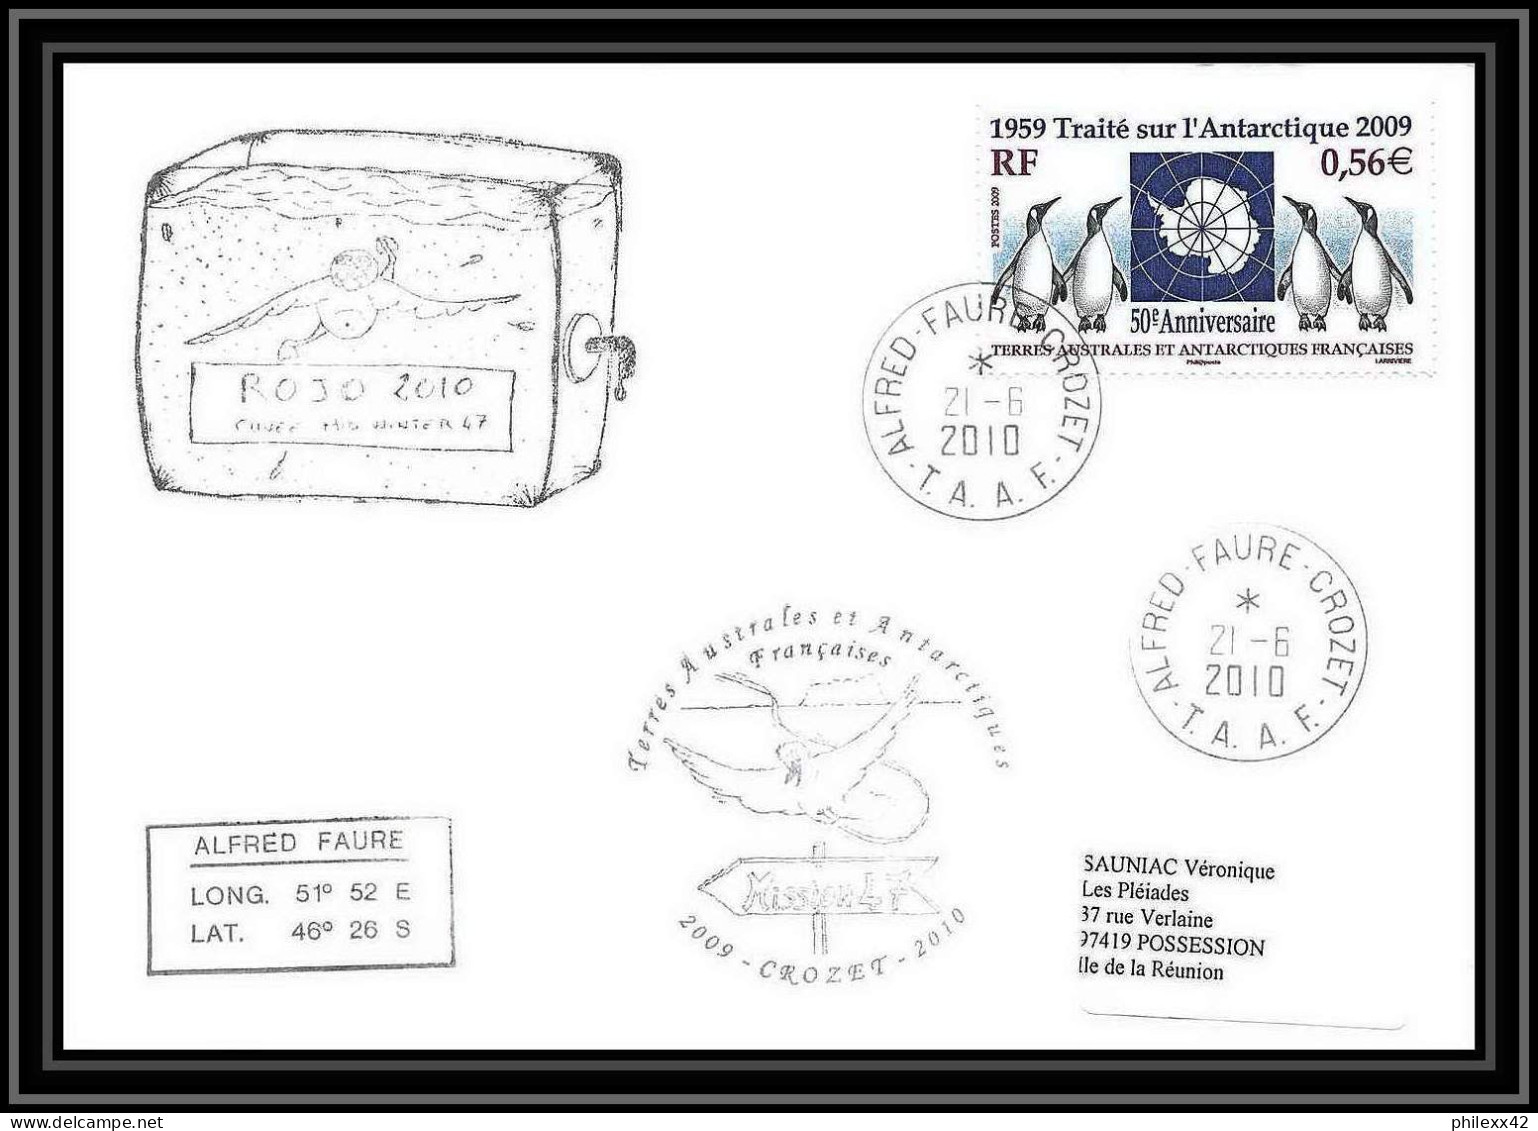 3010 Dufresne 2 Crozet Mission 47 21/6/2010 N°551 ANTARCTIC Terres Australes (taaf) Lettre Cover - Covers & Documents